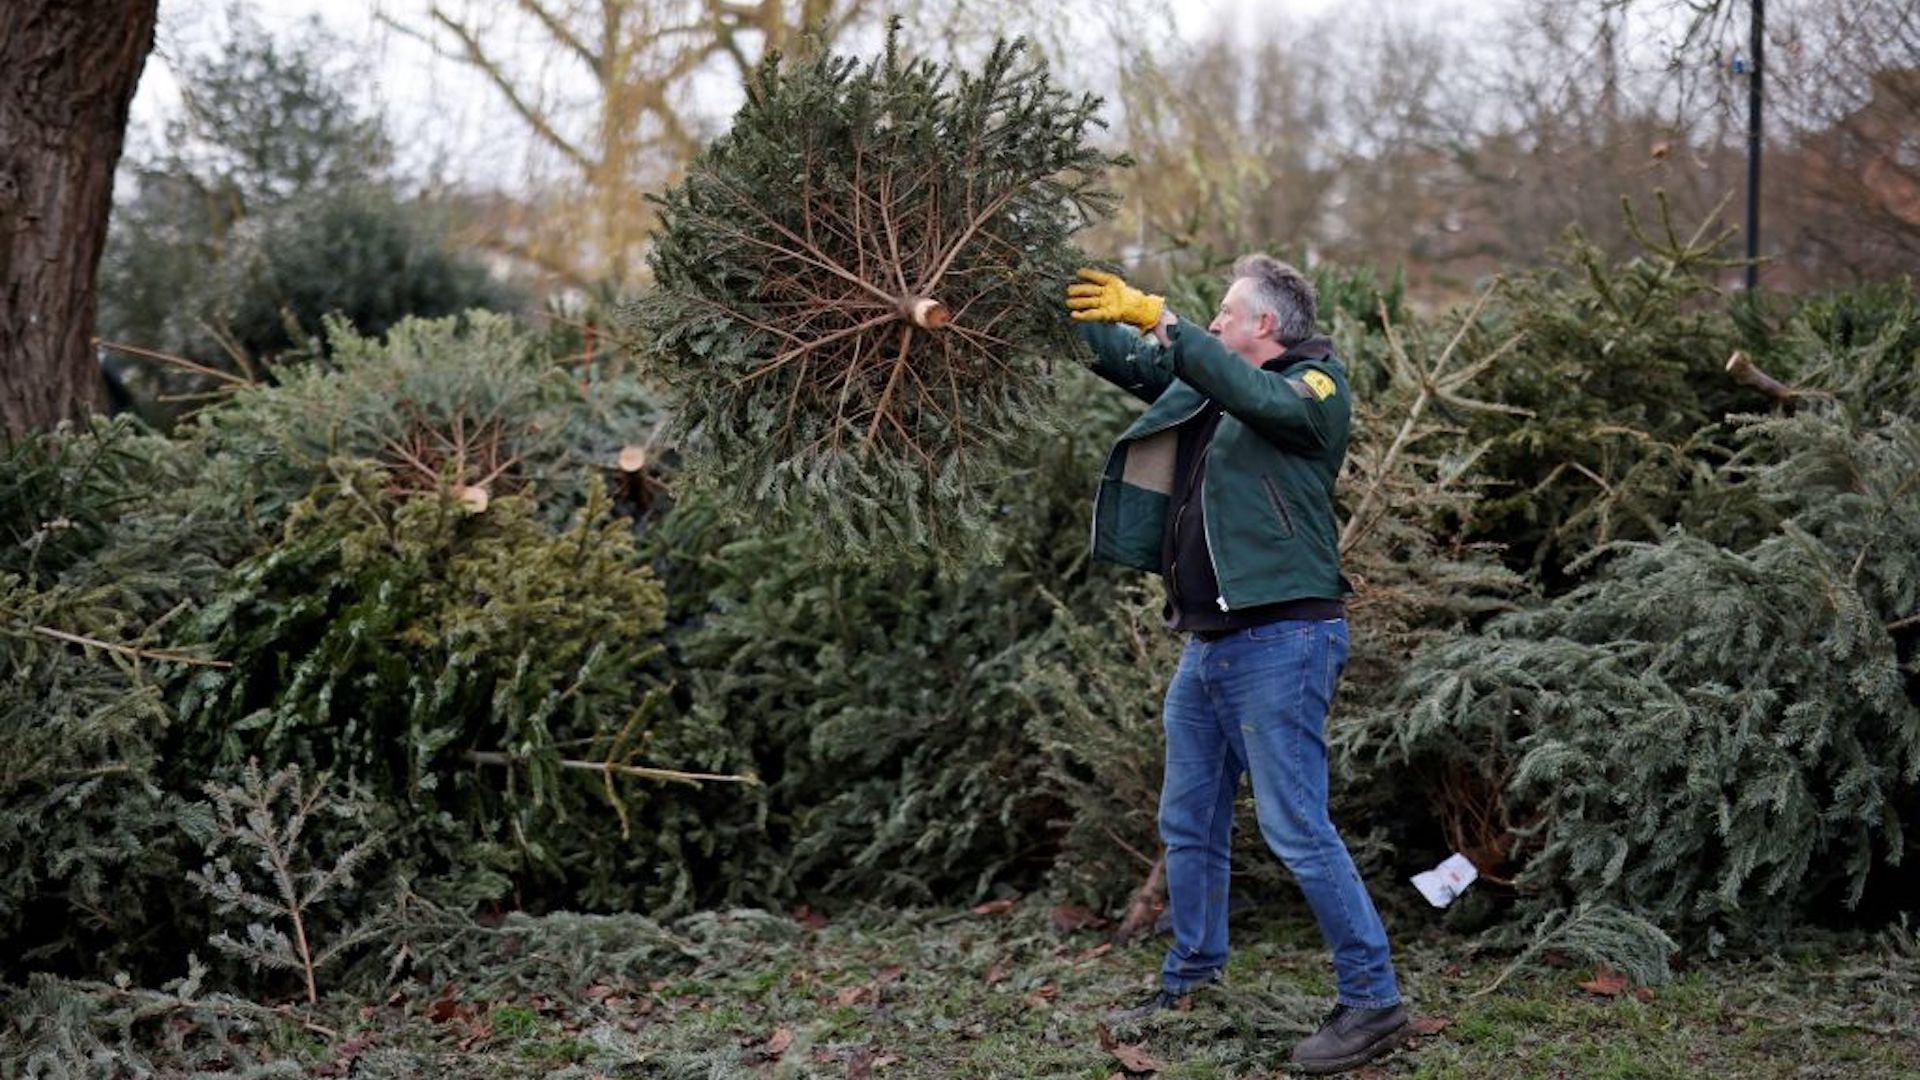 Volunteers unload collected Christmas trees before at Kentish Town City Farm in north London on January 7, 2022, where they will be used for the farm's goats to feed on.